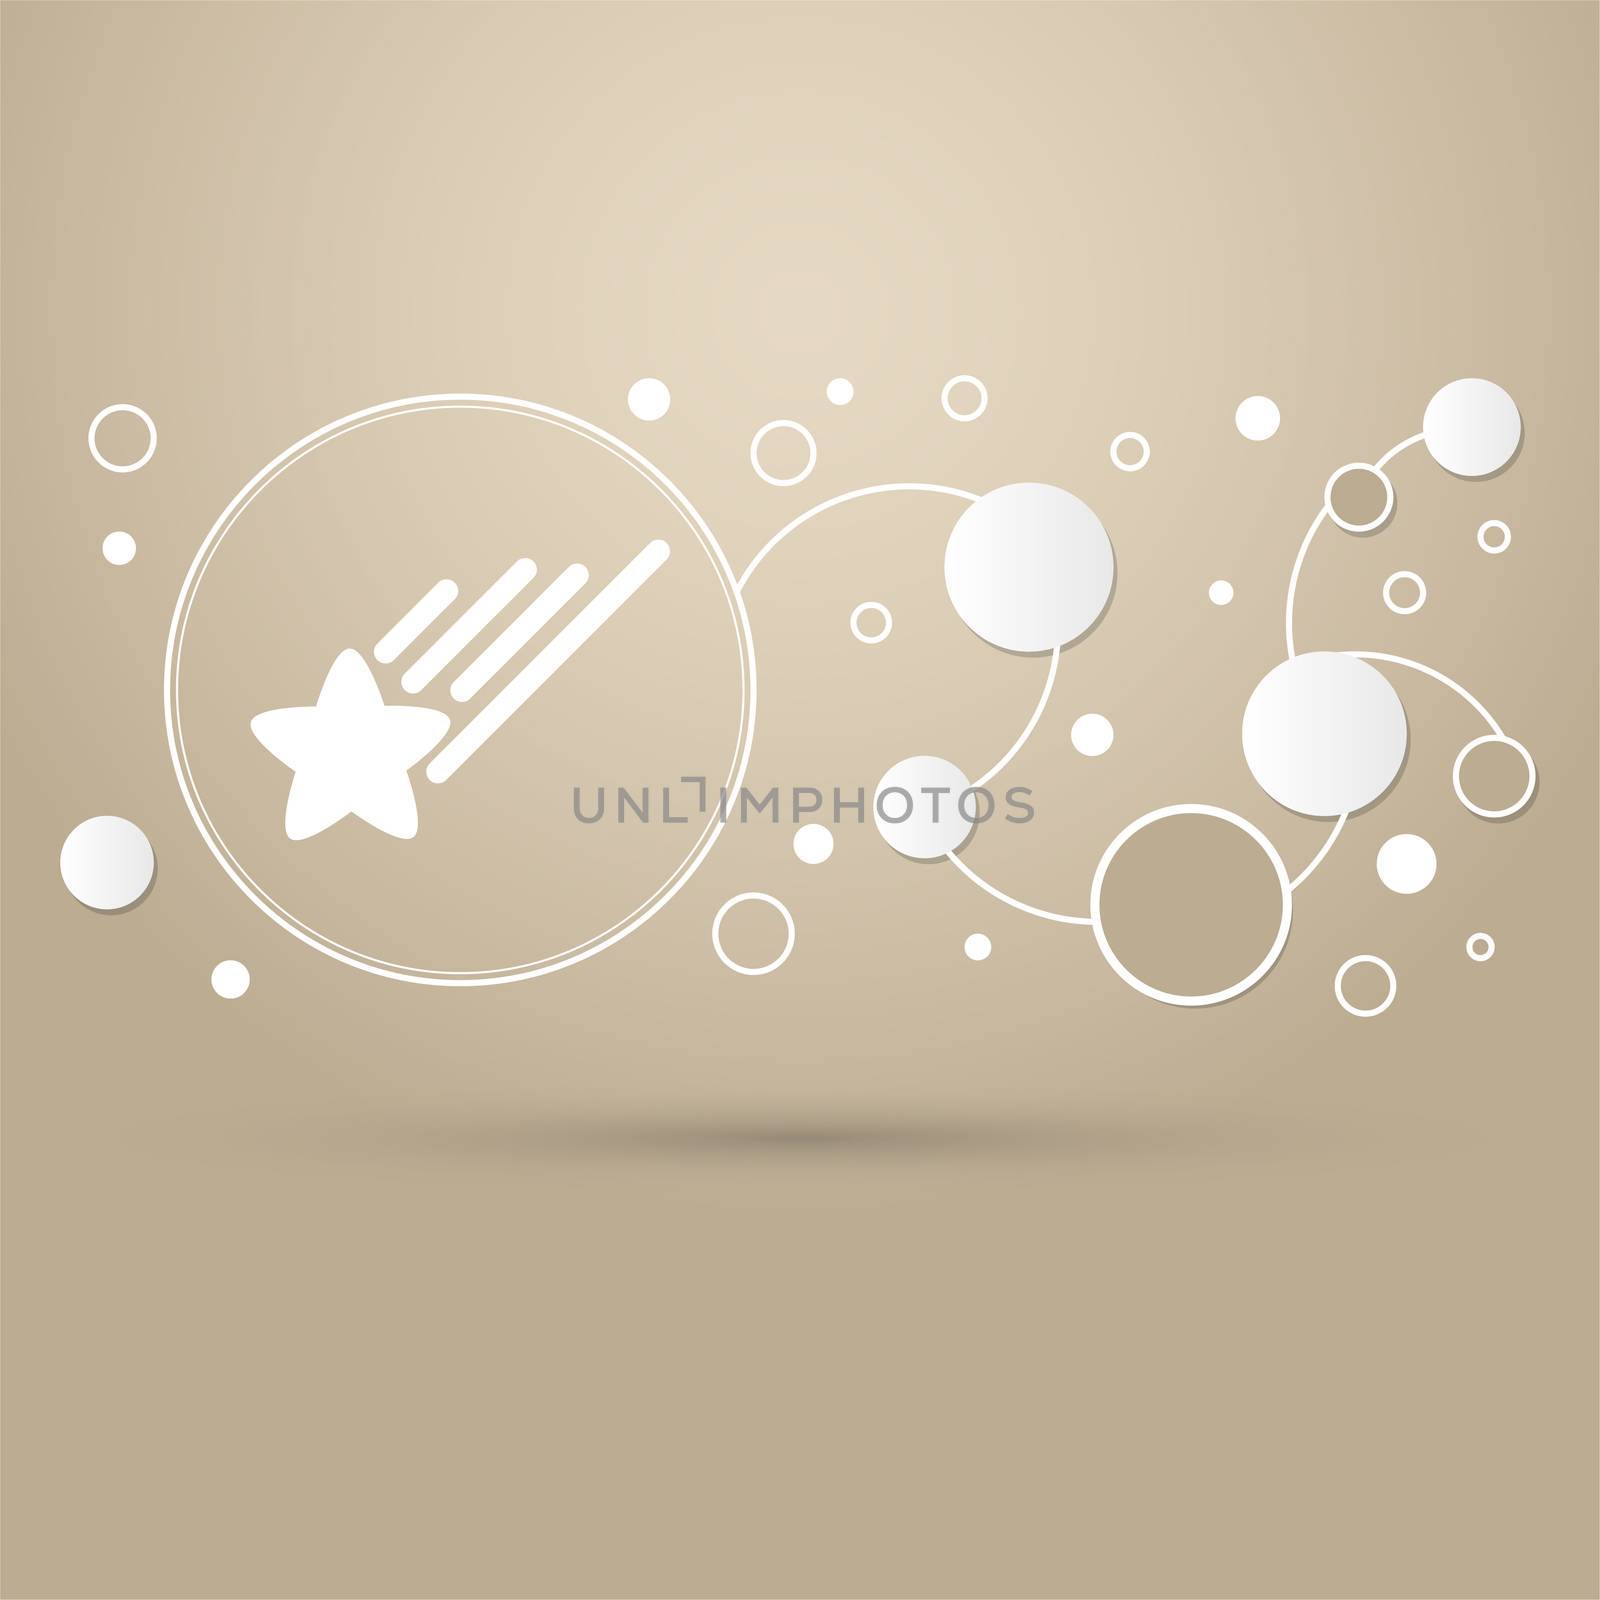 Star Icon on a brown background with elegant style and modern design infographic. illustration